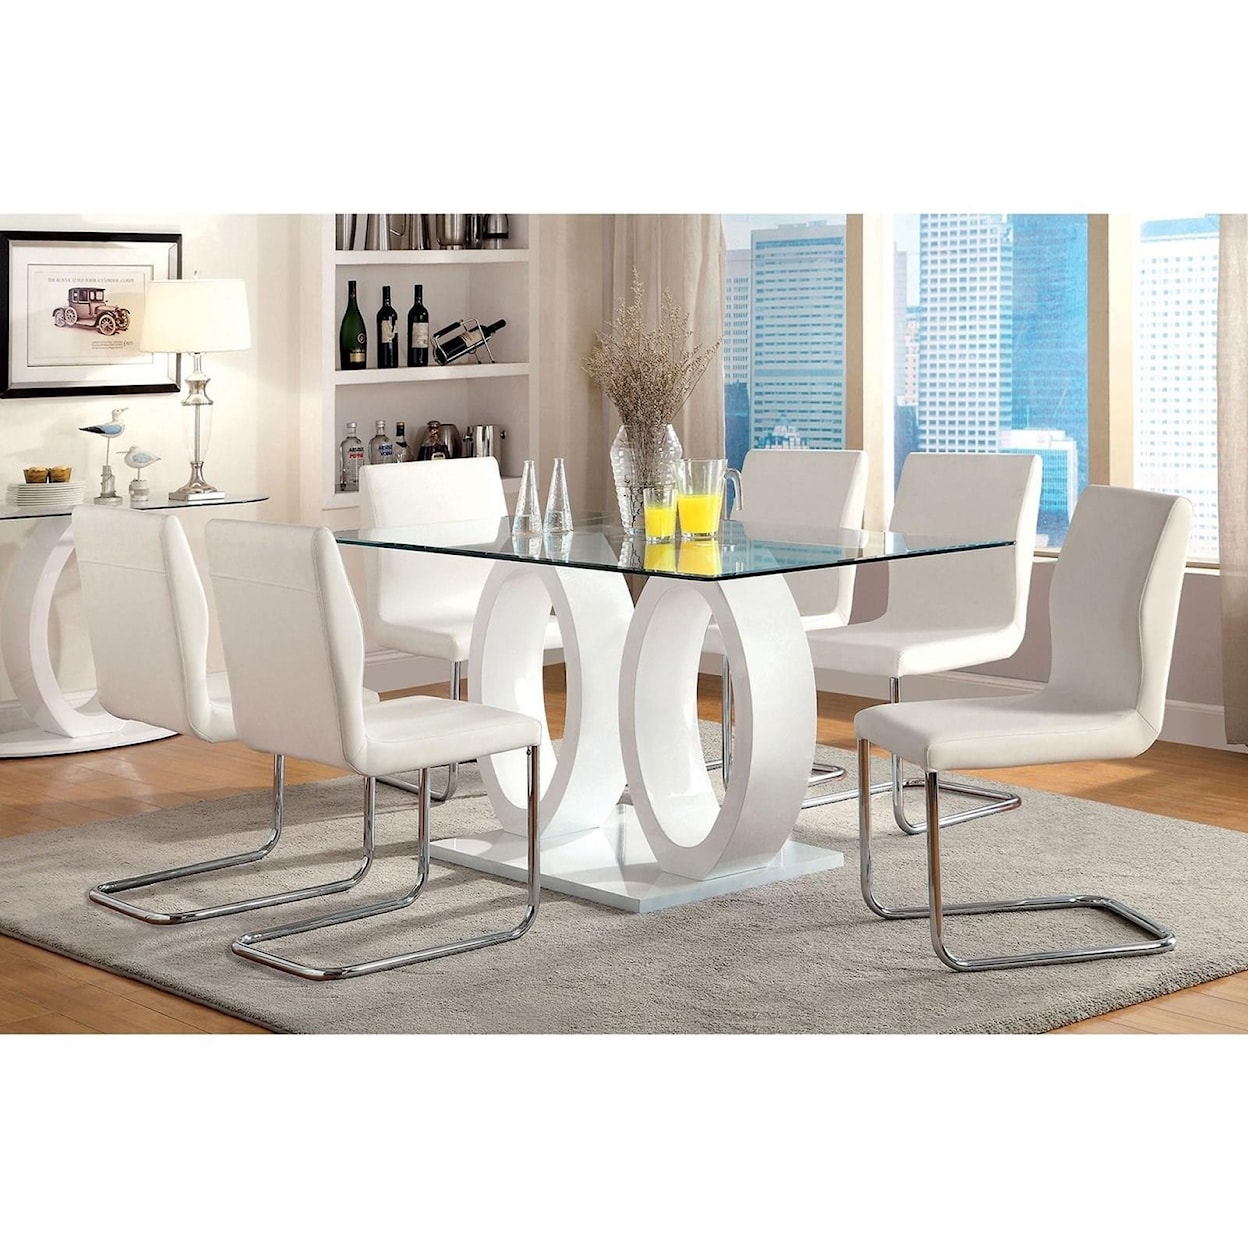 Furniture of America Lodia I Dining Table w/ 10mm Glass Top